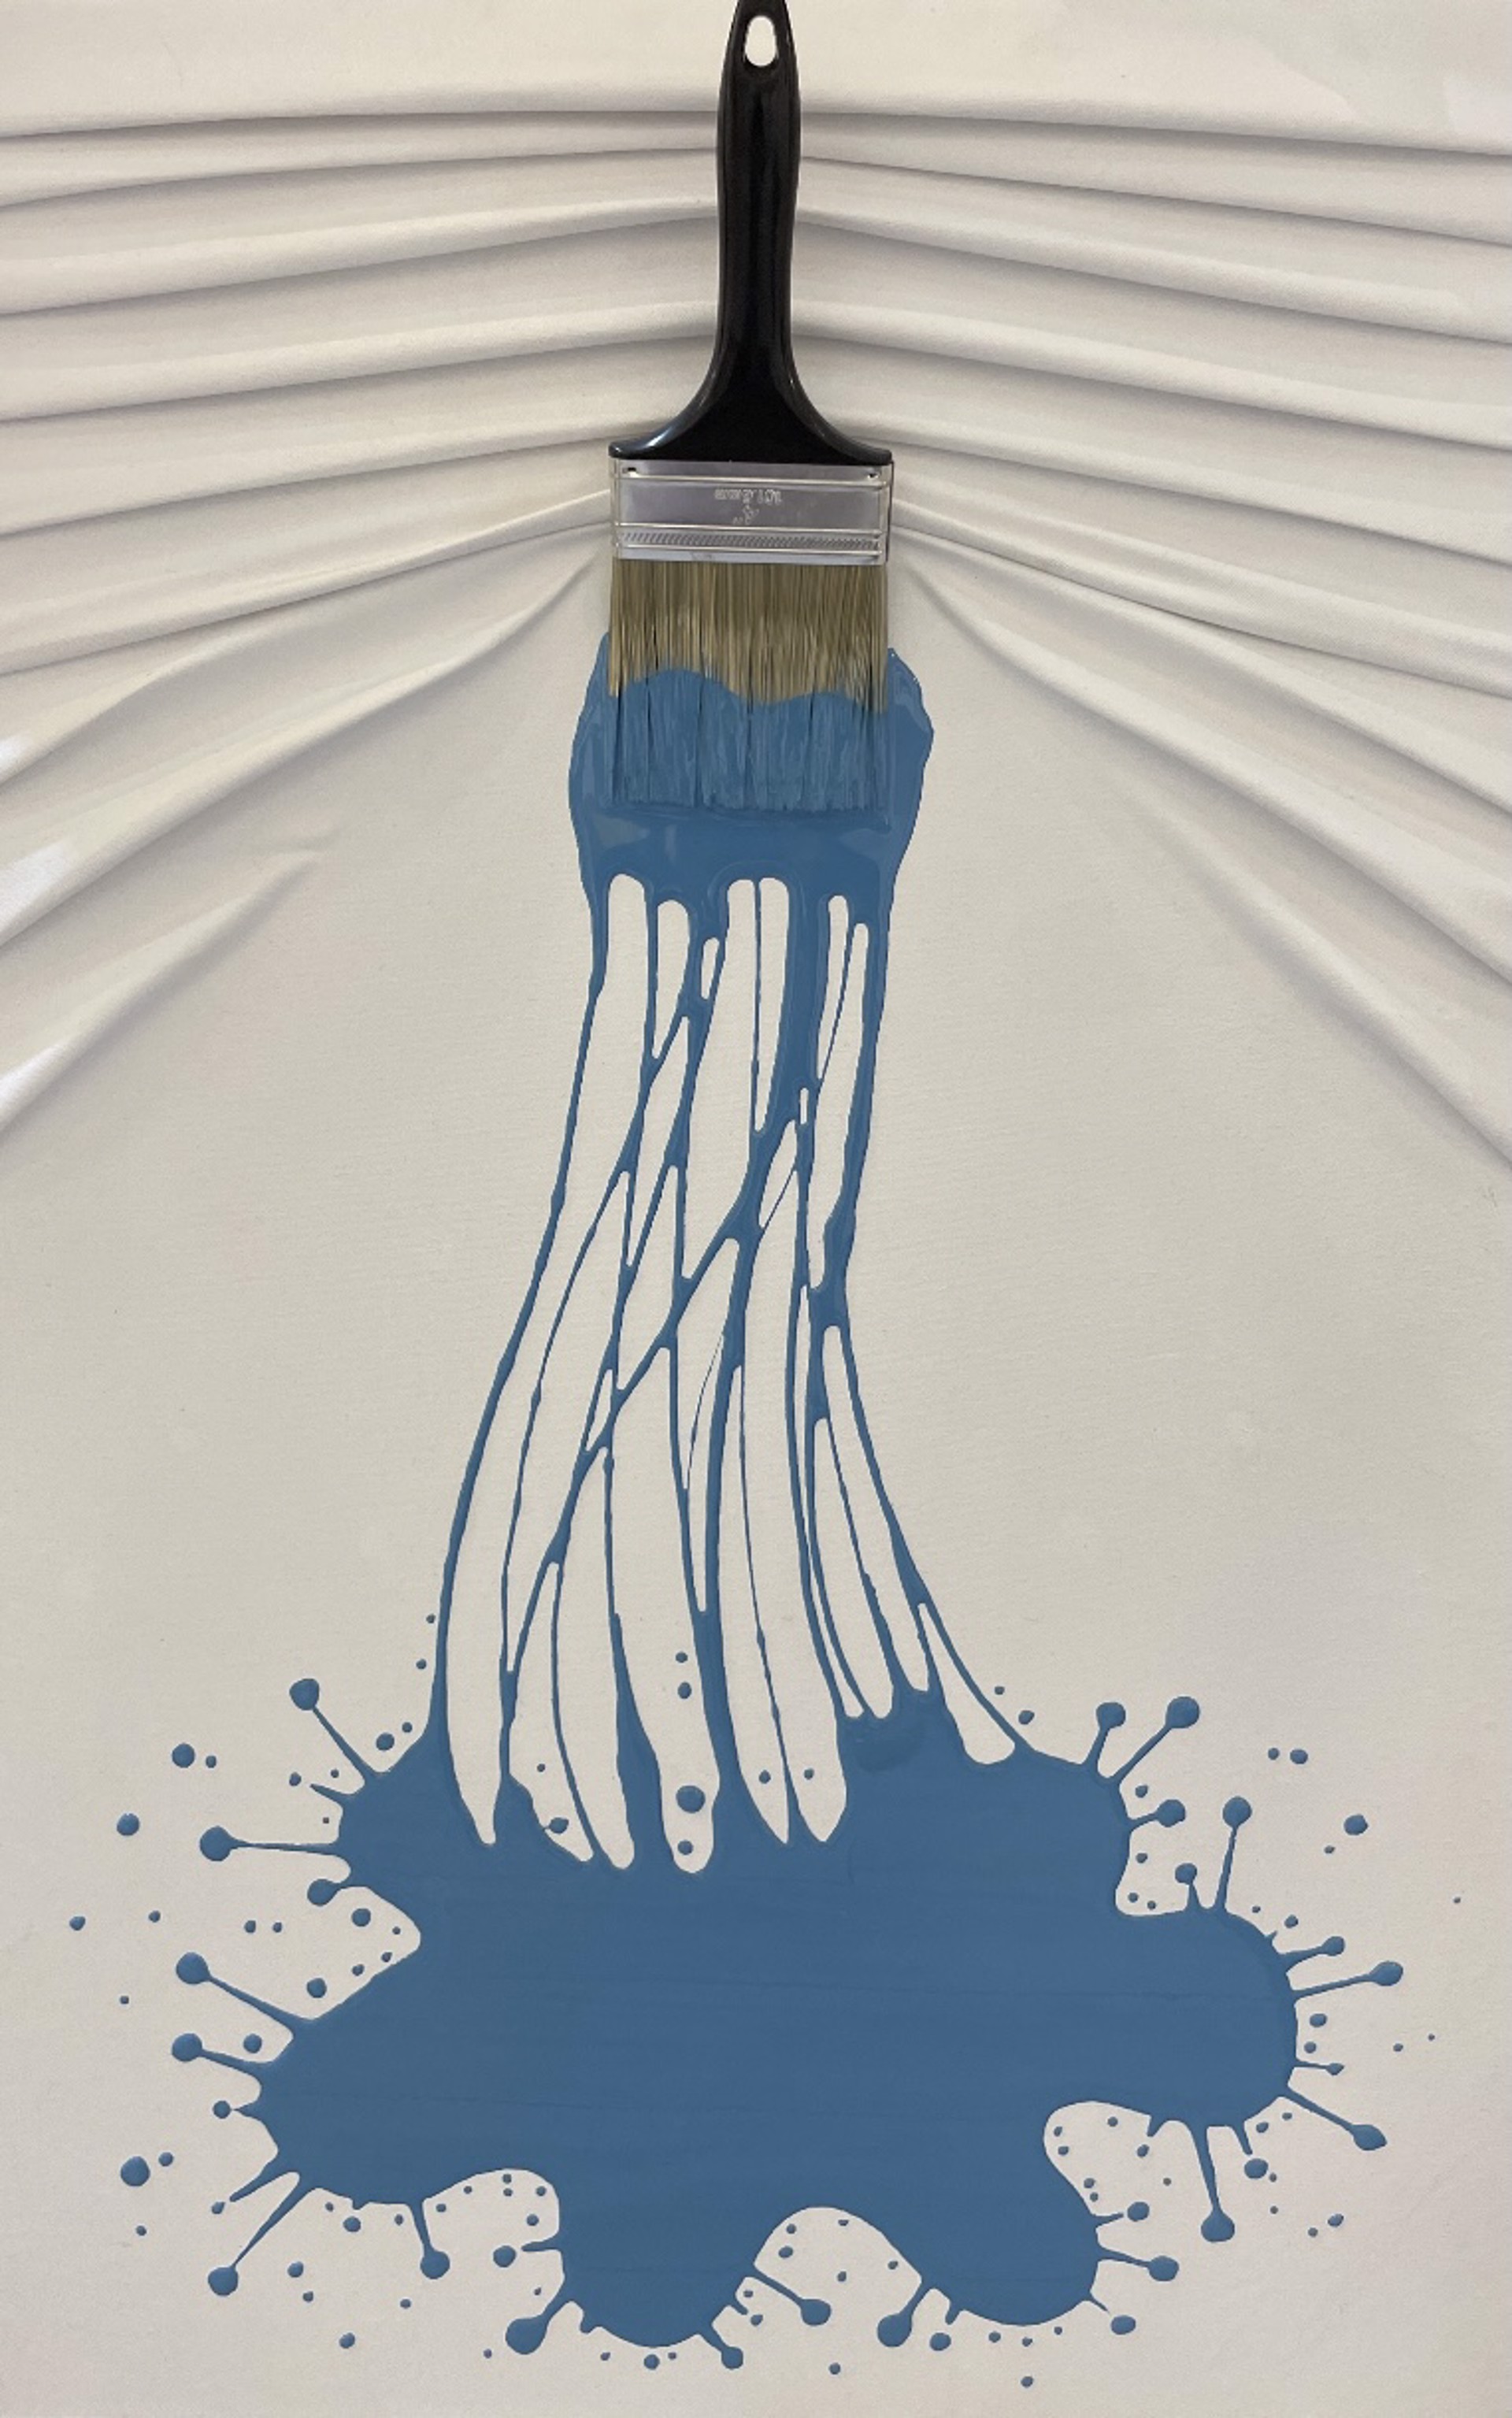 Blue Medium Splash on the White Canvas  by Brushes and Rollers "Let's Paint" by Efi Mashiah